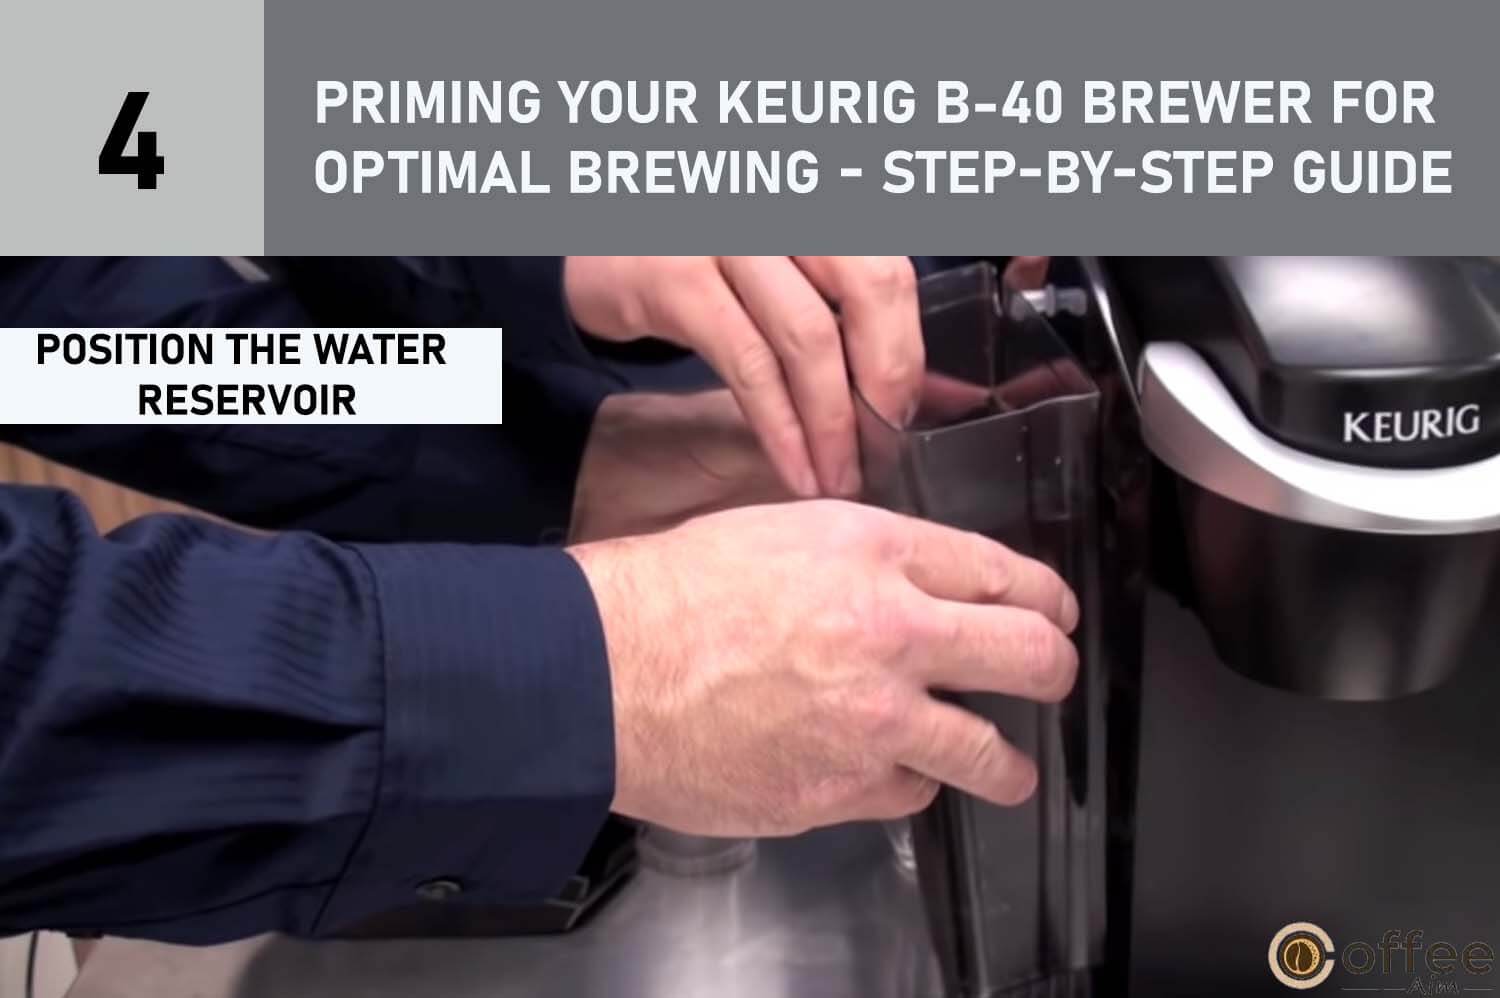 The image vividly illustrates the precise positioning of the water reservoir, a crucial step in our comprehensive guide titled "Priming Your Keurig B-40 Brewer for Optimal Brewing - A Step-by-Step Guide." This visual aid perfectly complements our article on how to use the Keurig B-40